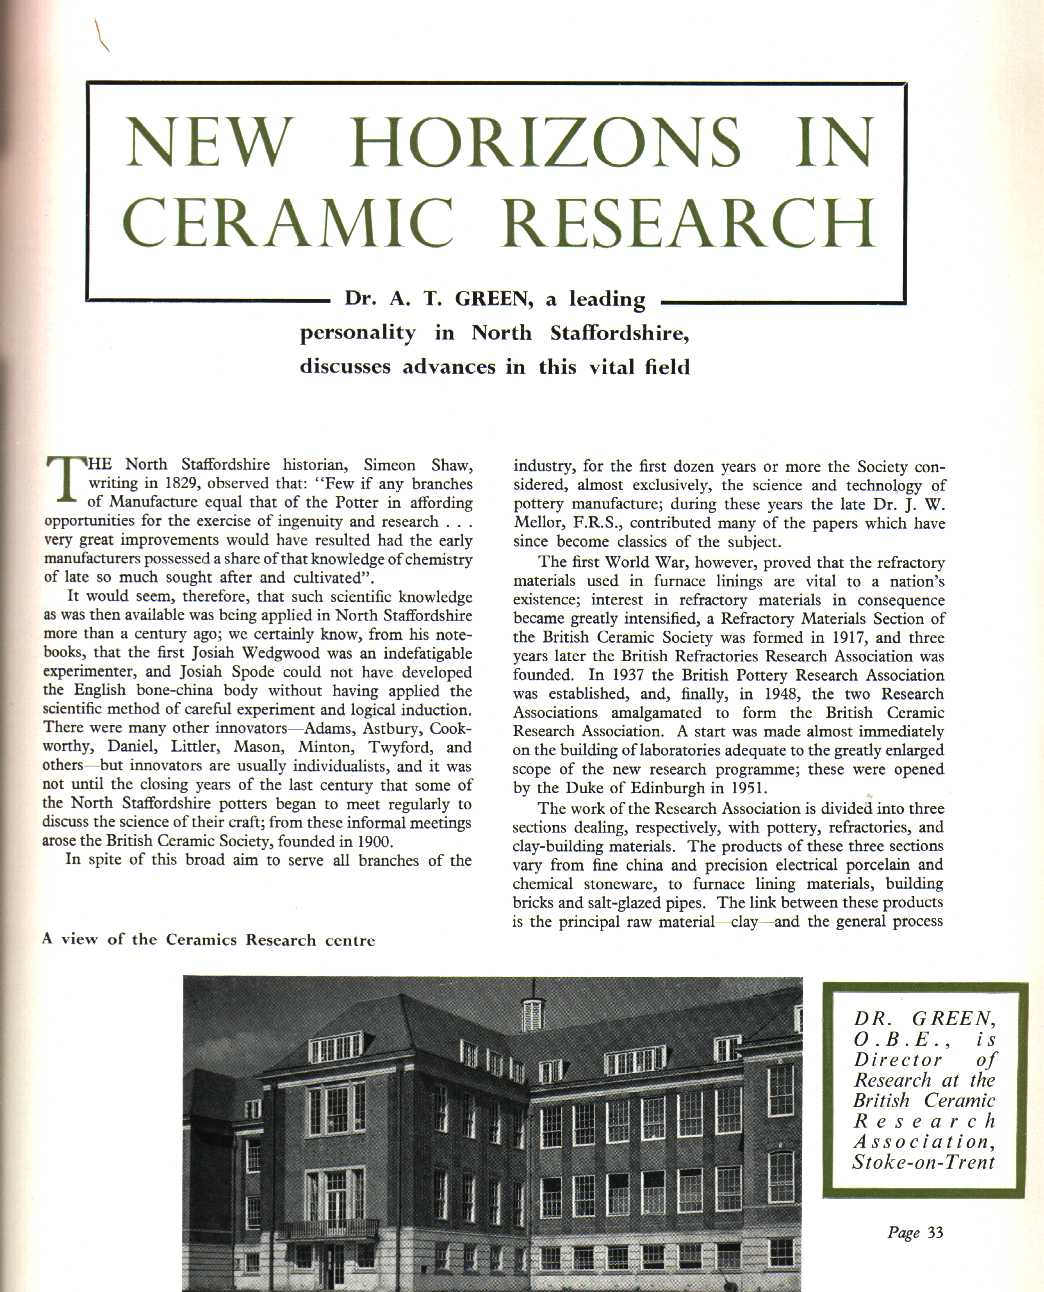 "New Horizons in Ceramic Research" - by the Director of British Ceramic Research Association